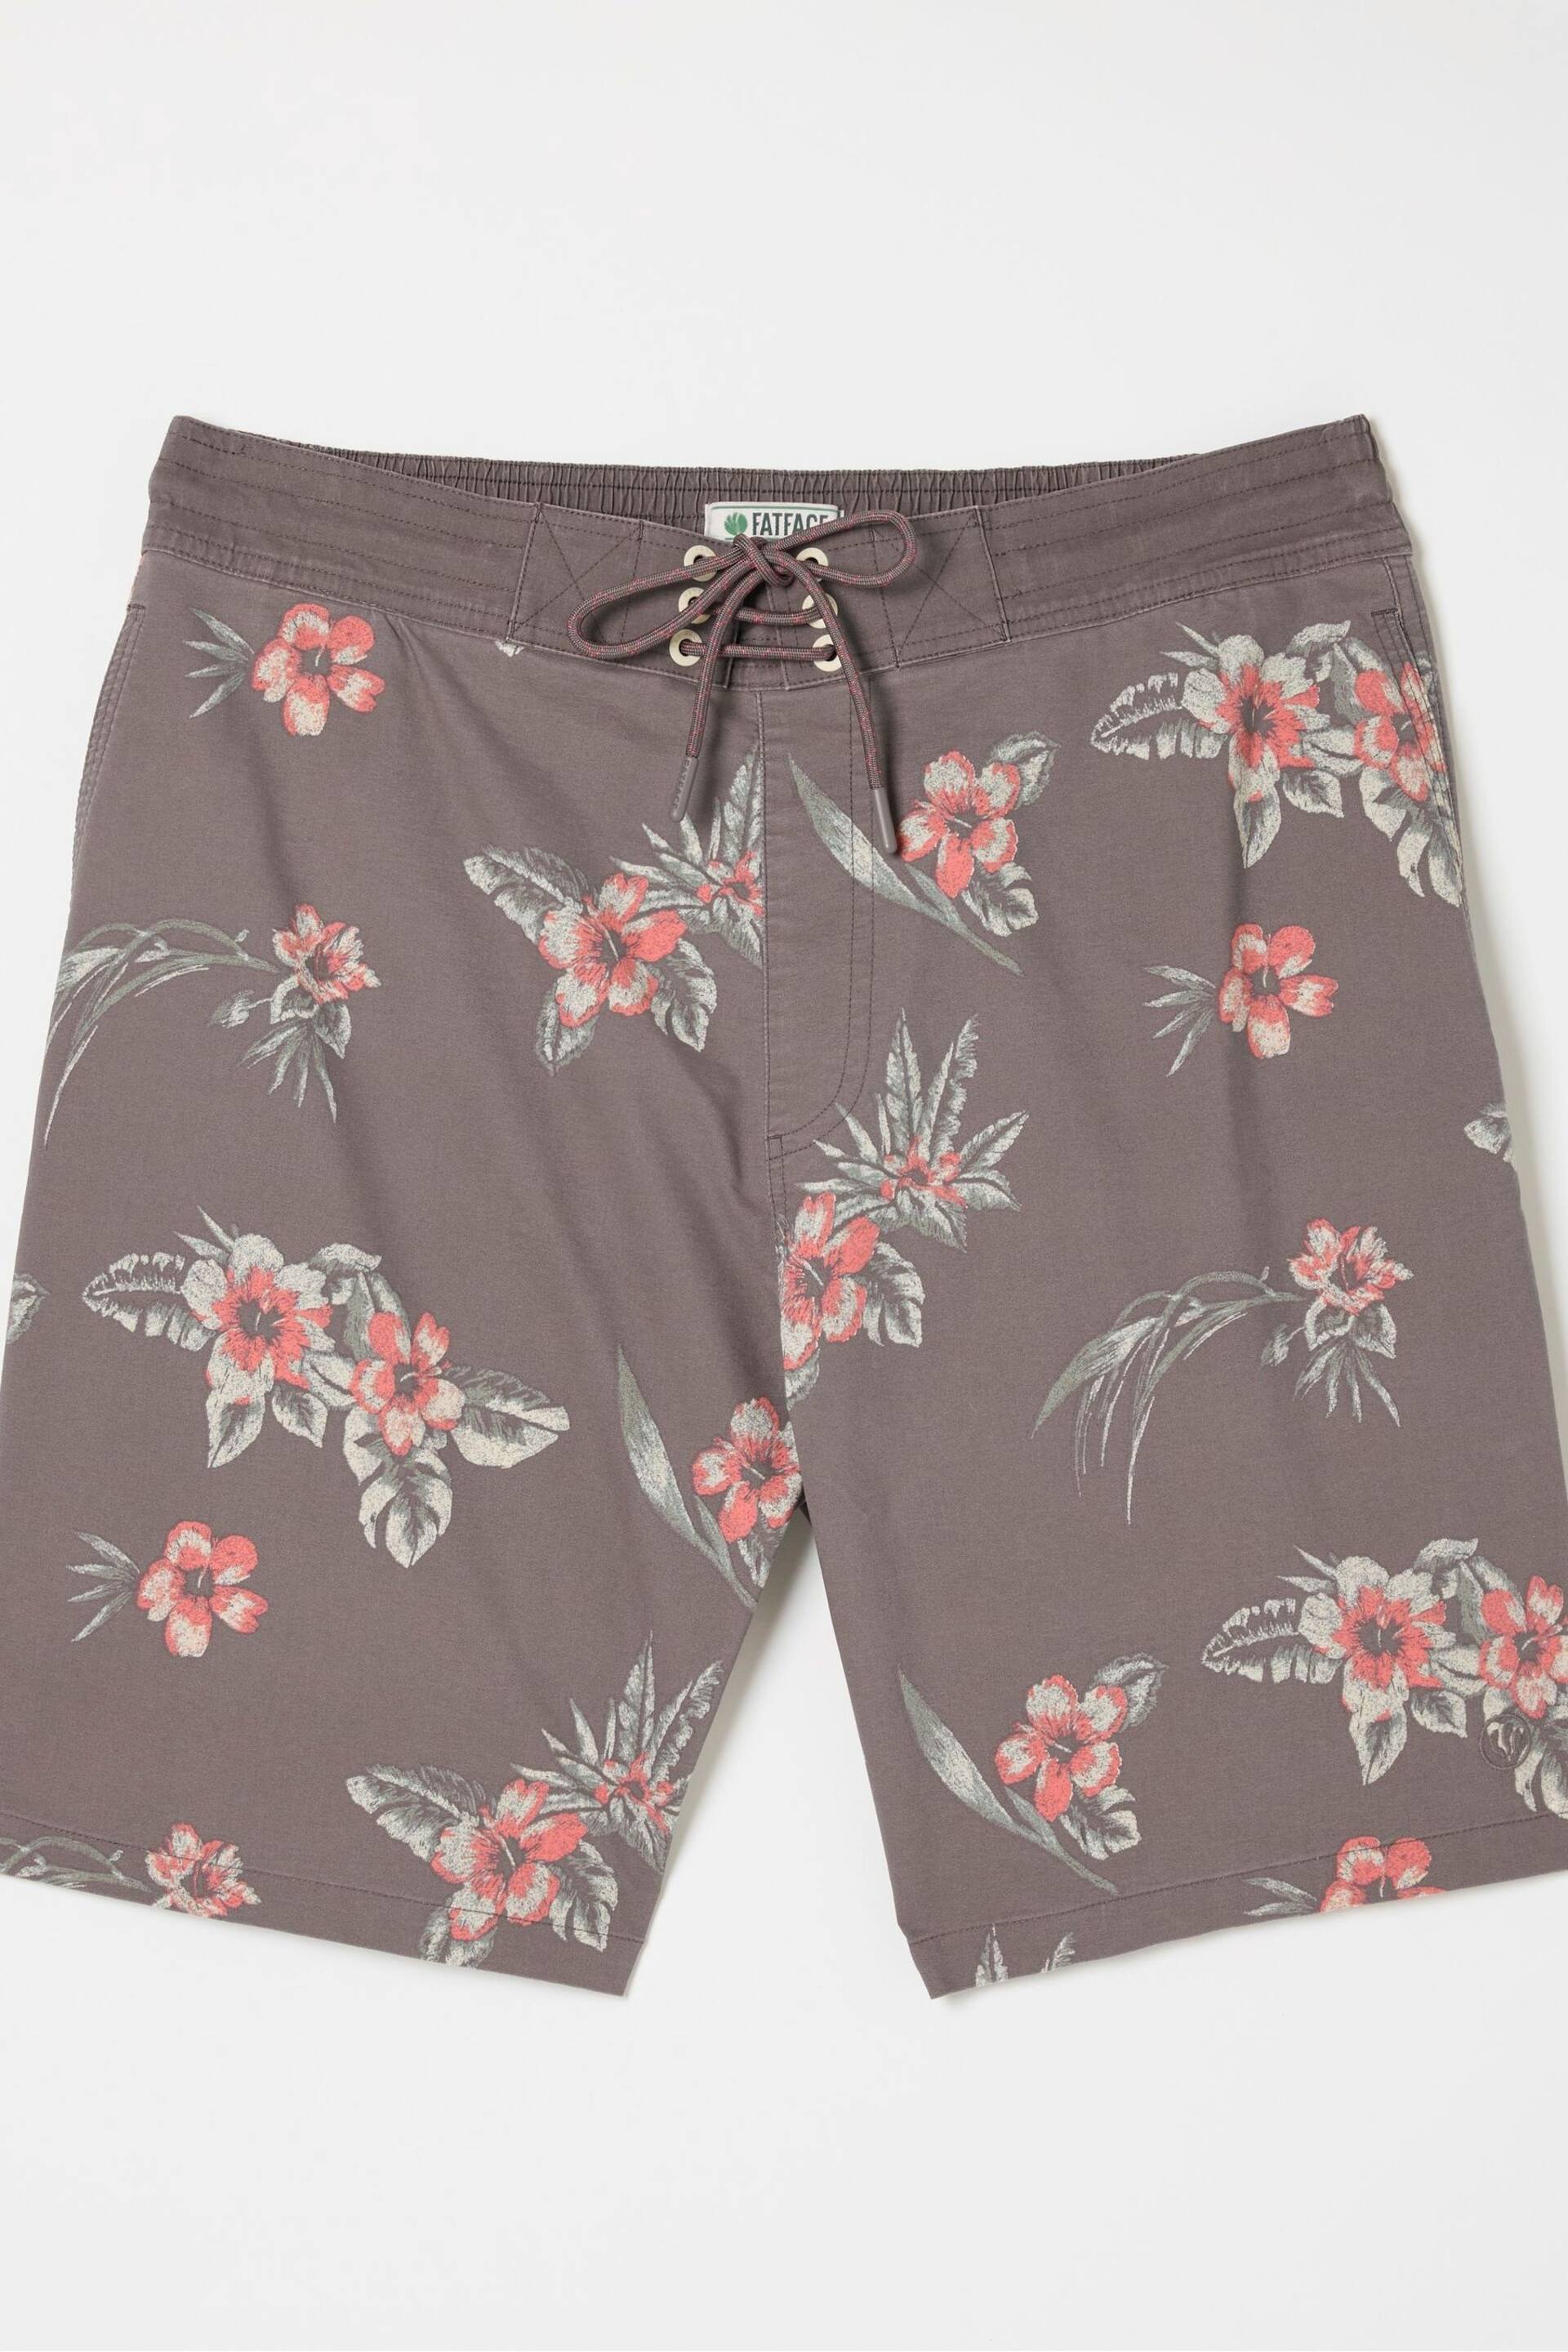 FatFace Brown Camber Hibiscus Swim Shorts - Image 4 of 4